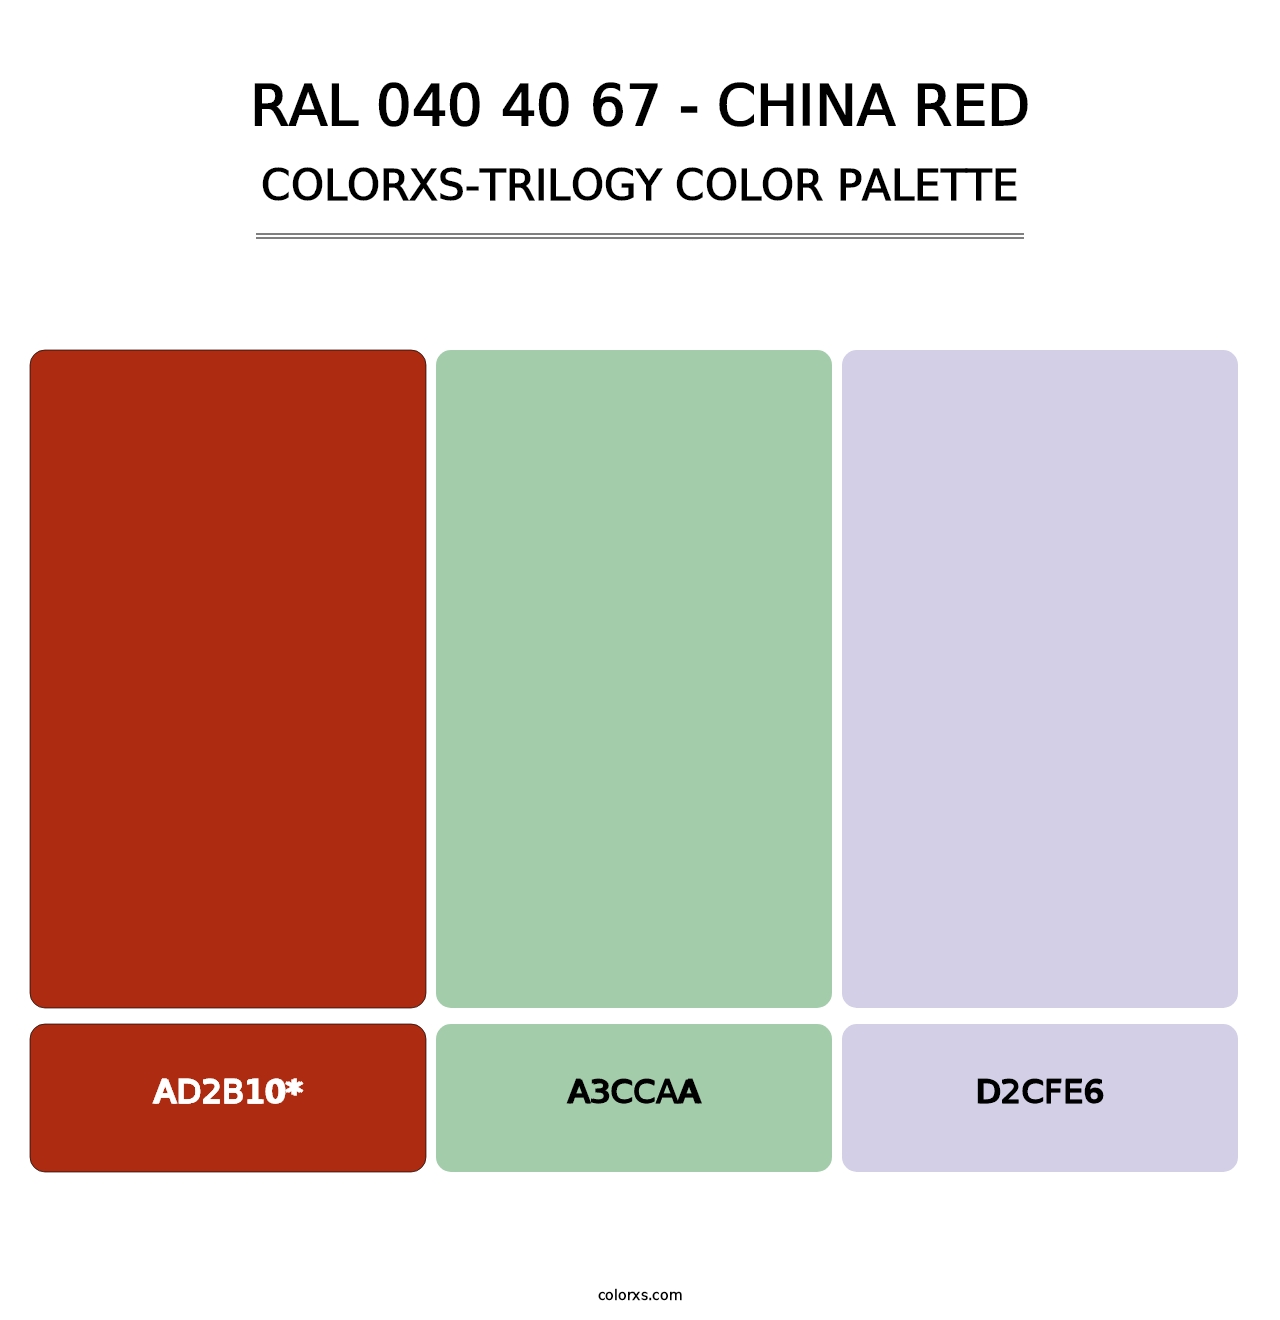 RAL 040 40 67 - China Red - Colorxs Trilogy Palette